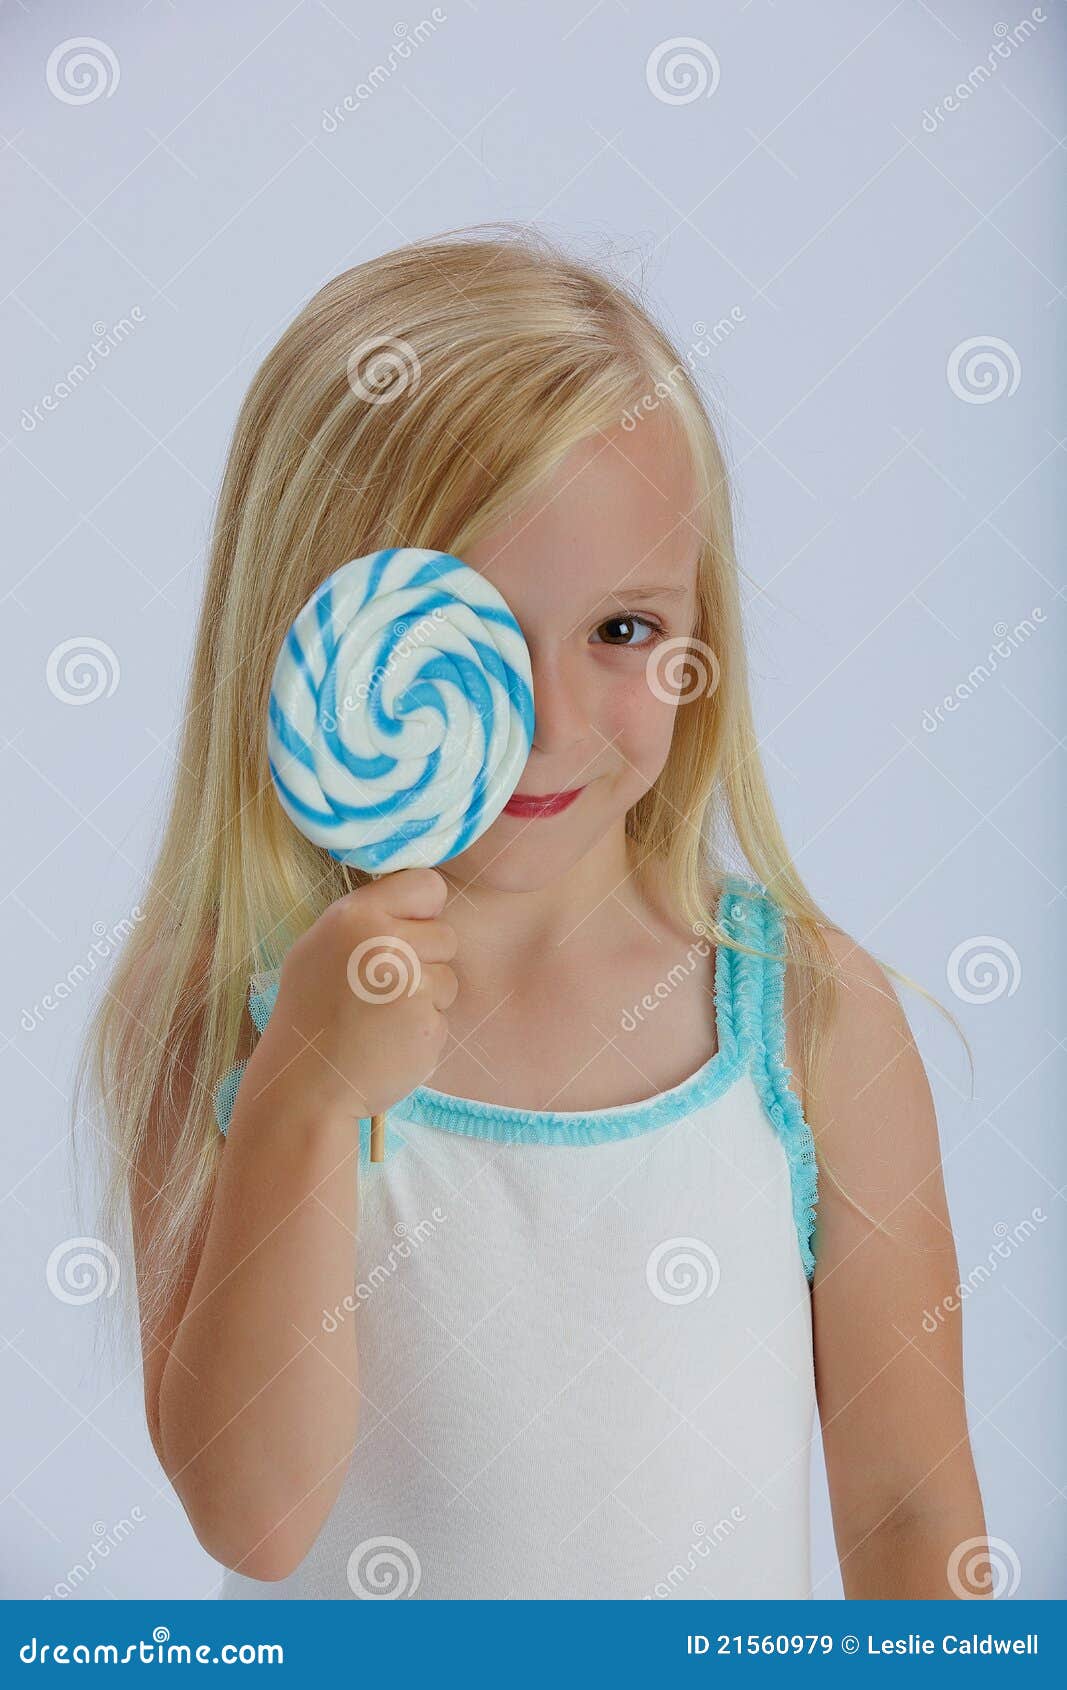 Cute Girl With Lollipop Royalty Free Stock Images Image 21560979